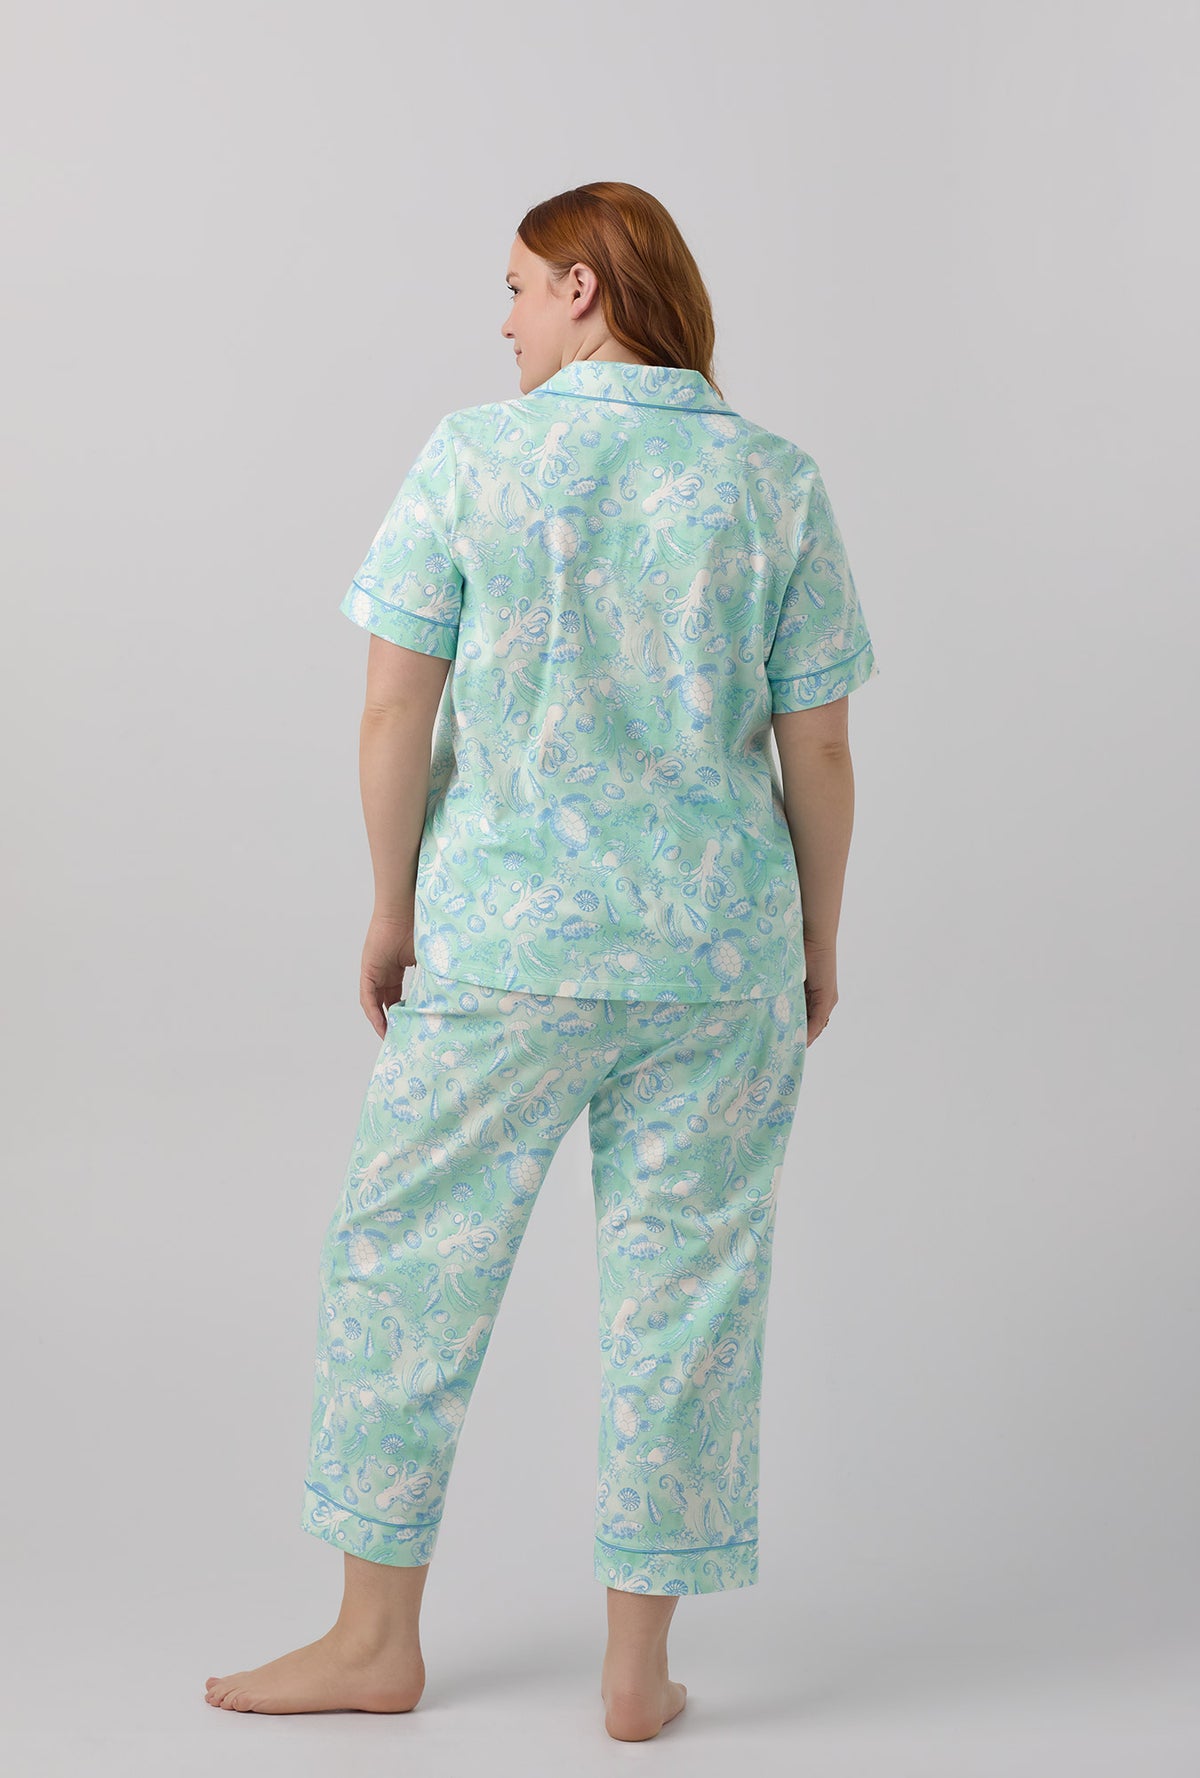 A lady wearing short sleeve stretch jersey cropped plus size pj set with aquatic life print